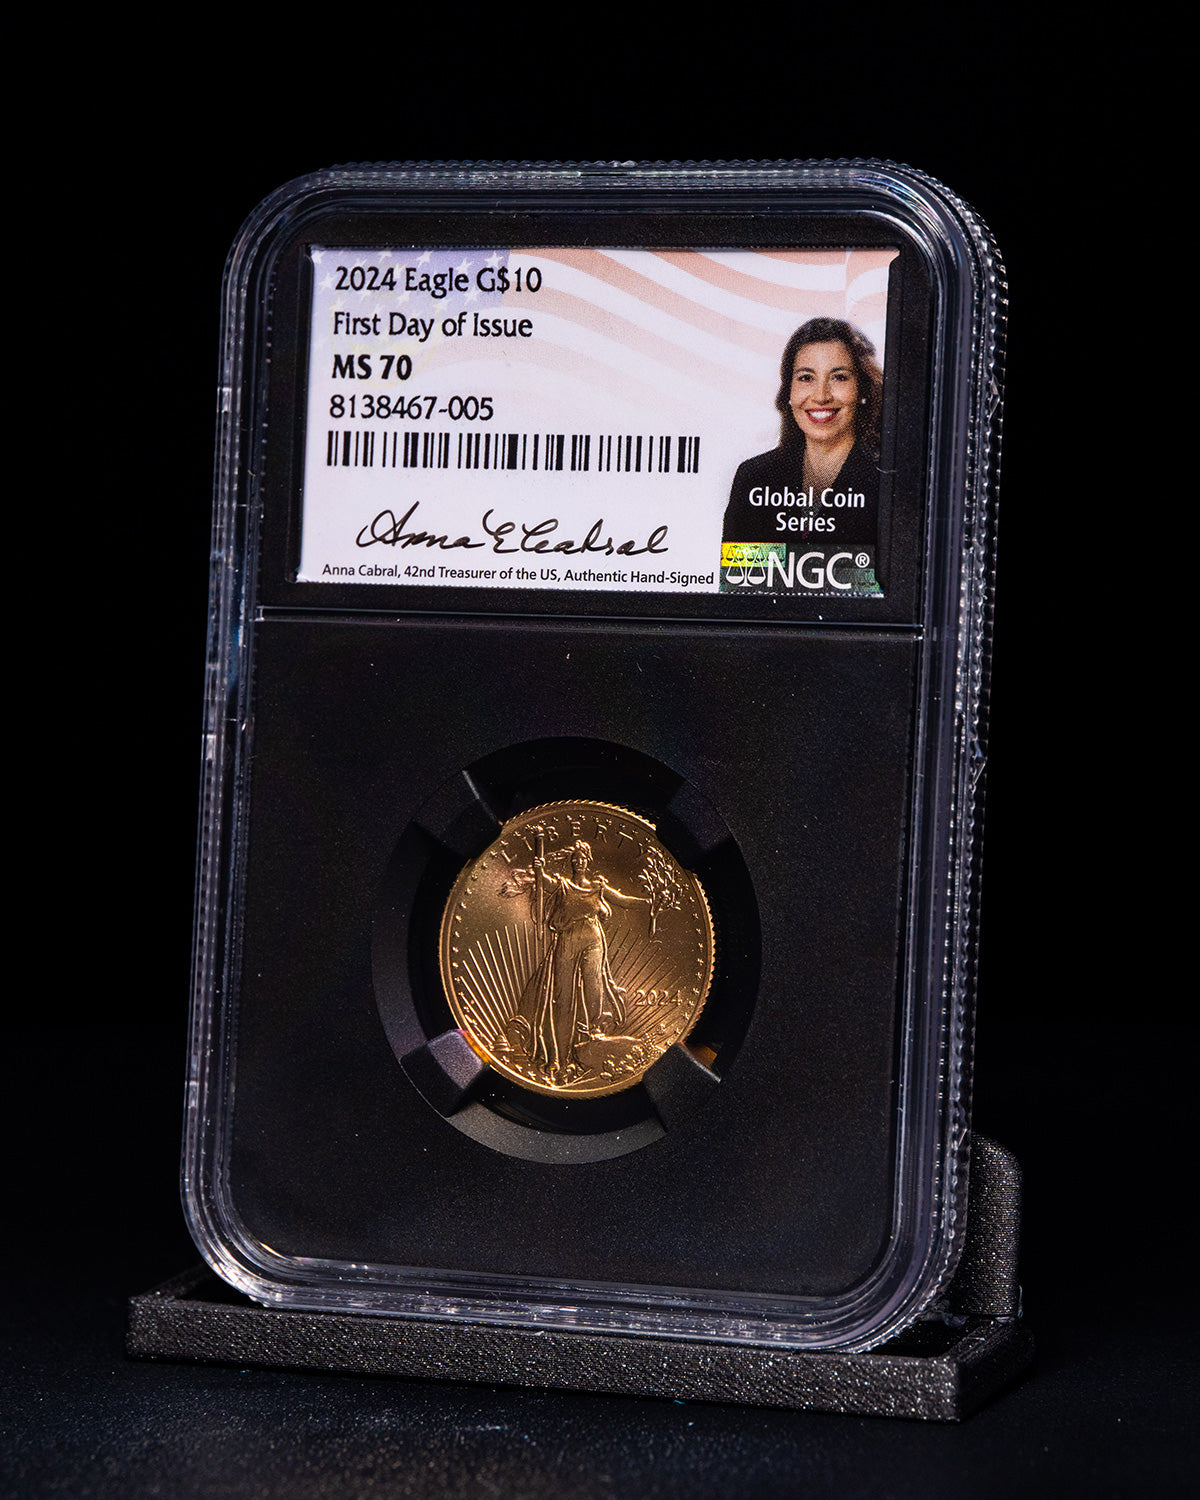 2024 $10 Gold Eagle | First Day of Issue Global Coin Series NGC MS70 | Anna Cabral Autographed